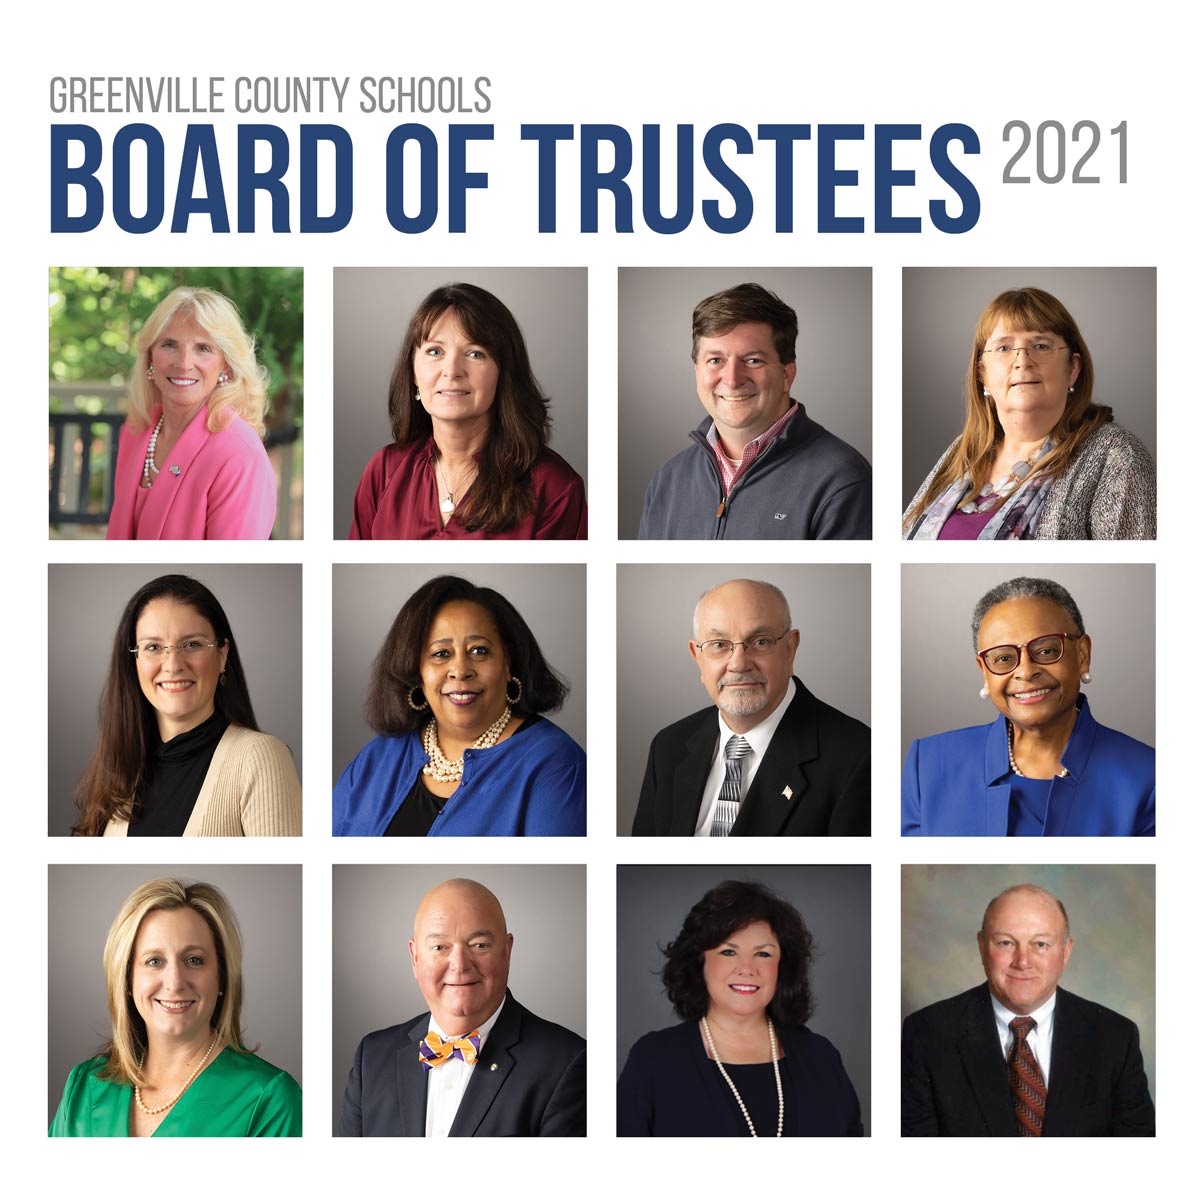 Greenville County Schools Board of Trustees. Left to right, top to bottom: <strong>Lynda Leventis-Wells</strong> | Area 22 | Chair; <strong>Lisa Wells</strong> | Area 28 | Vice Chair; <strong>Derek Lewis</strong> | Area 24 | Secretary; <strong>Debi C. Bush</strong> | Area 19; <strong>Sarah Dulin</strong> | Area 27; <strong>Michelle Goodwin-Calwile</strong> | Area 25; <strong>Roger D. Meek</strong> | Area 26; <strong>Glenda Morrison-Fair</strong> | Area 23; <strong>Angie Mosley</strong> | Area 21; <strong>Charles J. Saylors</strong> | Area 20; <strong>Carolyn Styles</strong> | Area 17; <strong>Pat Sudduth</strong> | Area 18